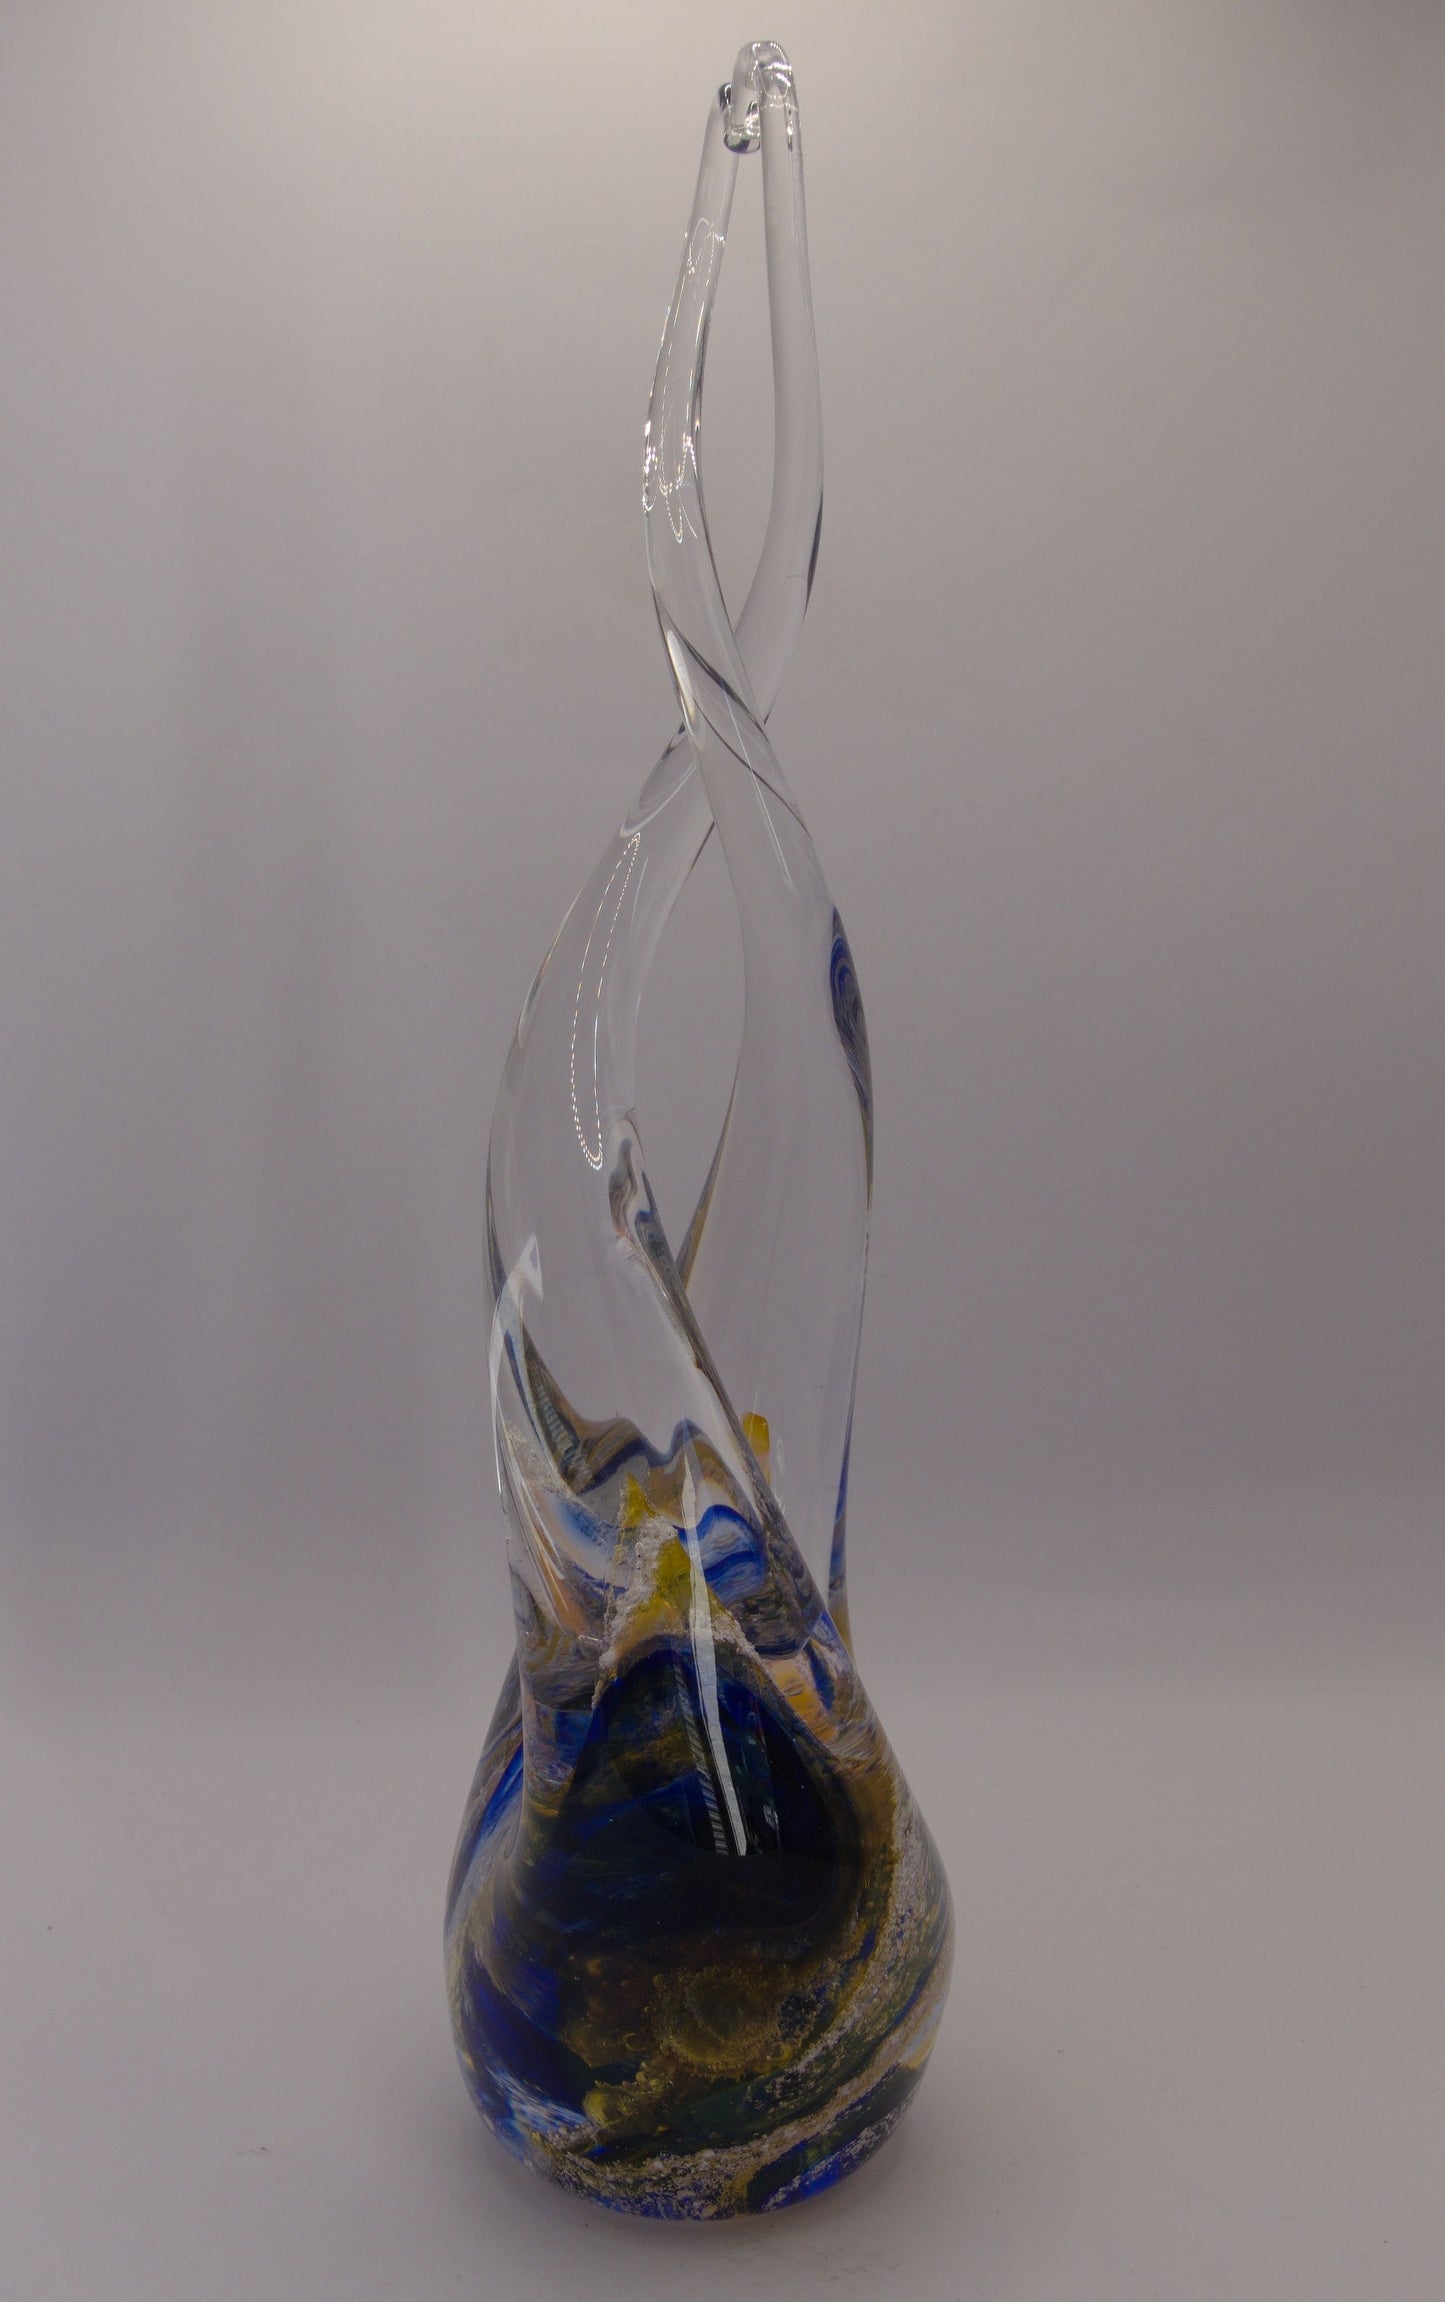 Cremation Ashes into Glass Heart Sculpture